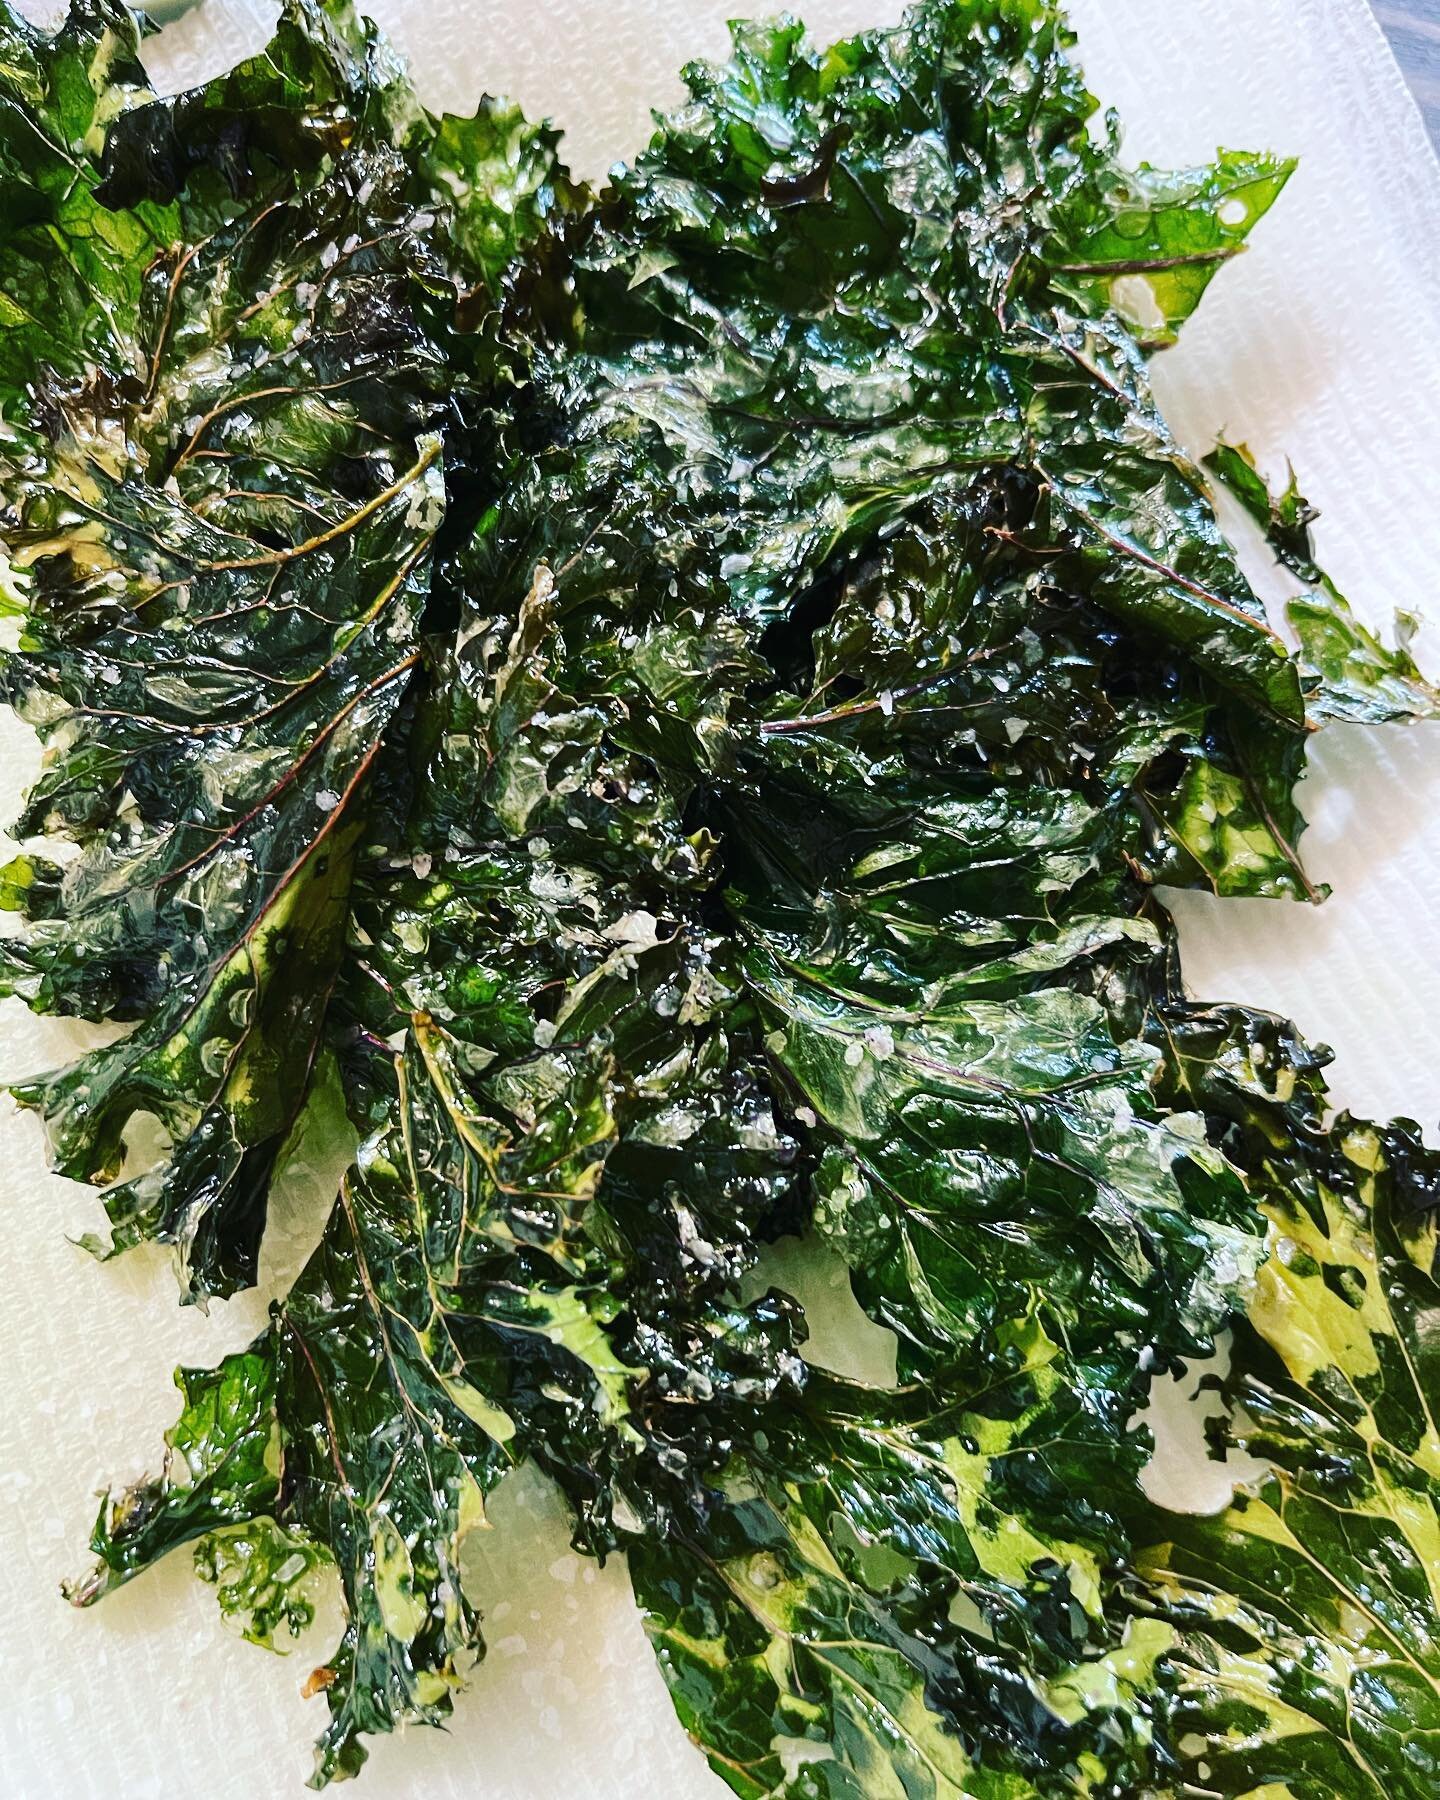 Fried Kale with sea salt, harvested from our garden 🌿 #gardening #sustainable #garden #ourownfood #kale #friedkale #yum